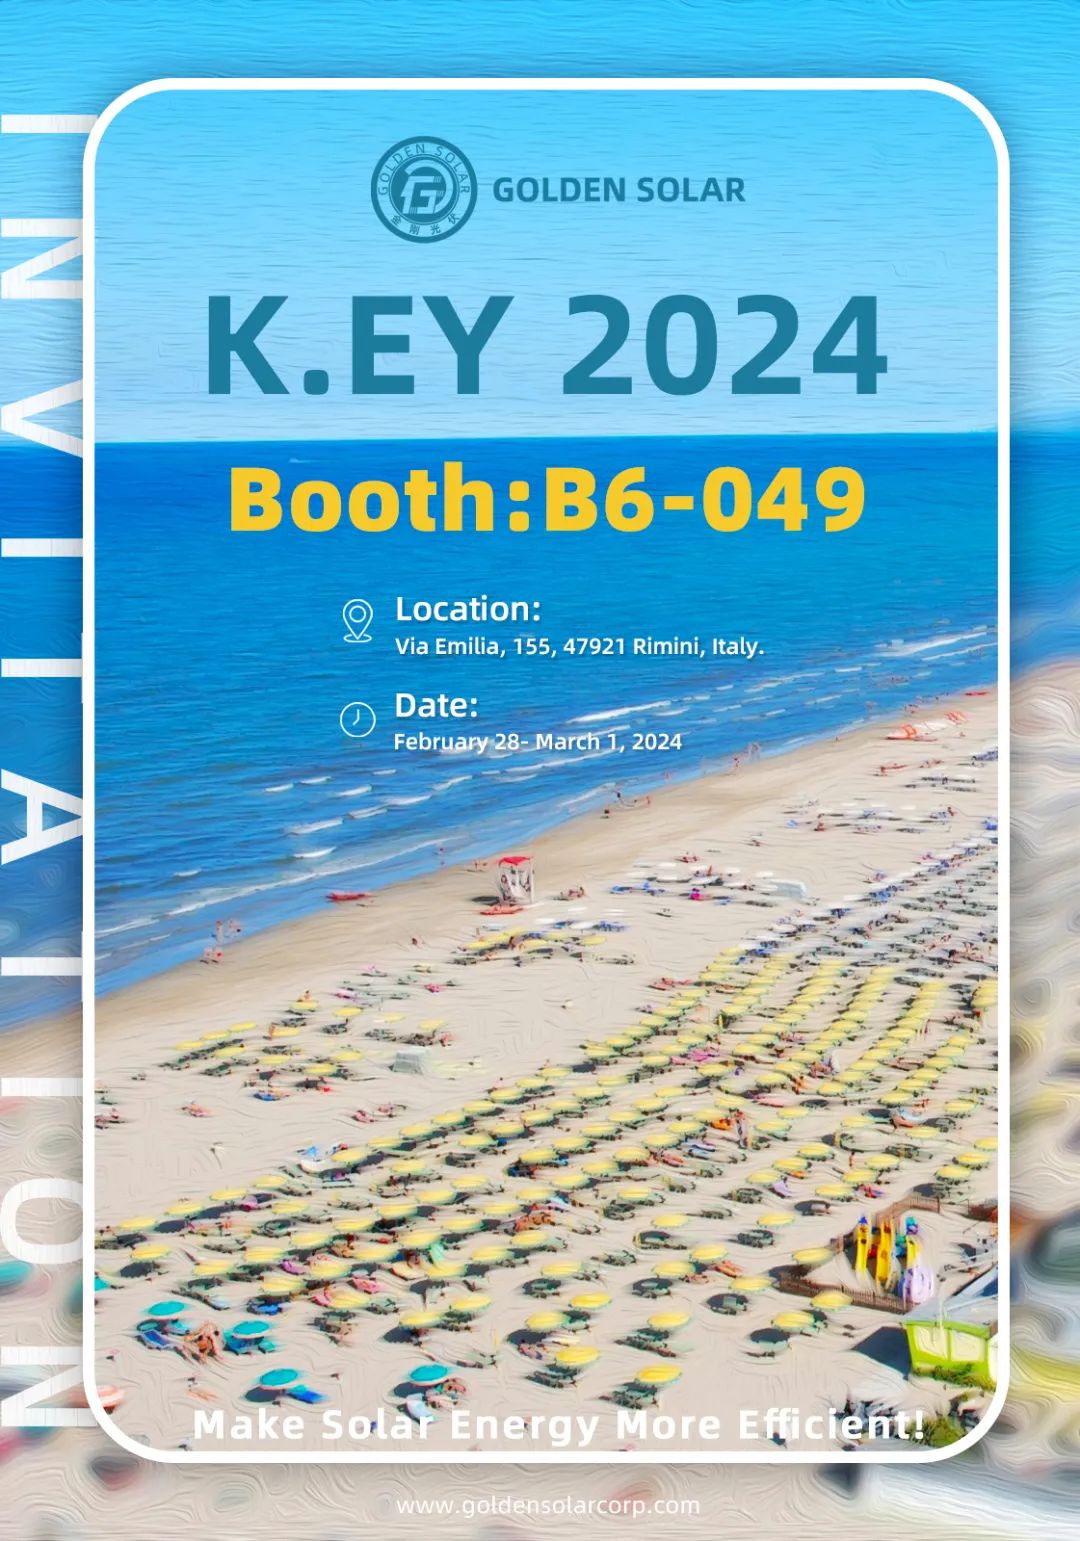 Upcoming Exhibitions | Golden Solar invites you to meet at K.EY 2024